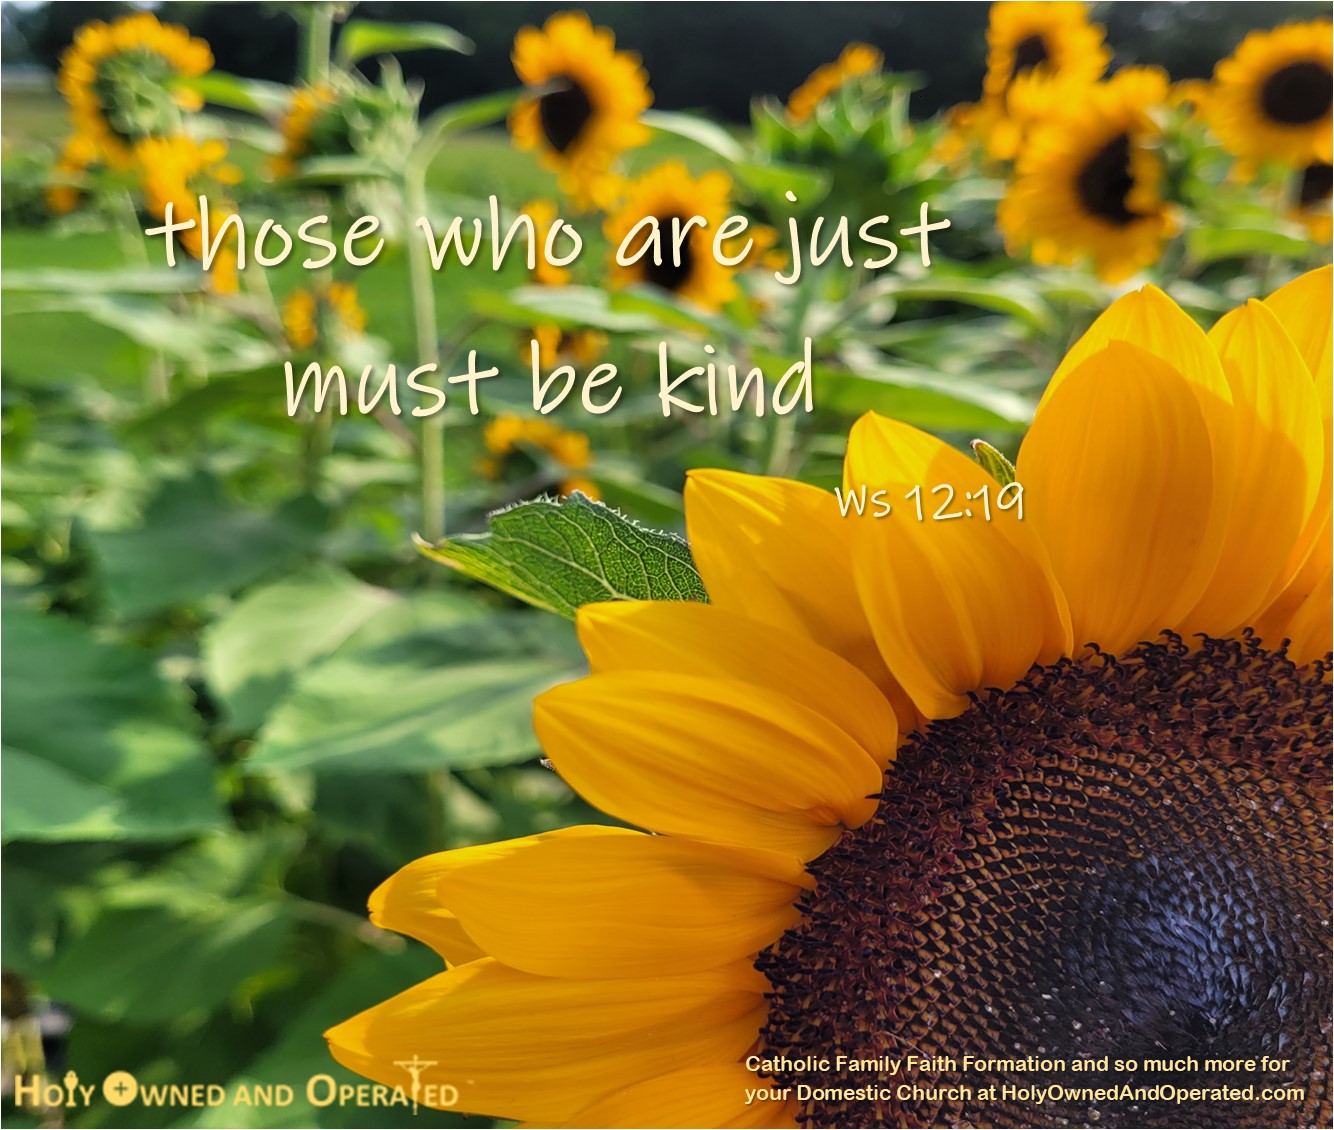 Kind Justice Sunflower field Text overlay Those who are just must be kind. Ws 12:19